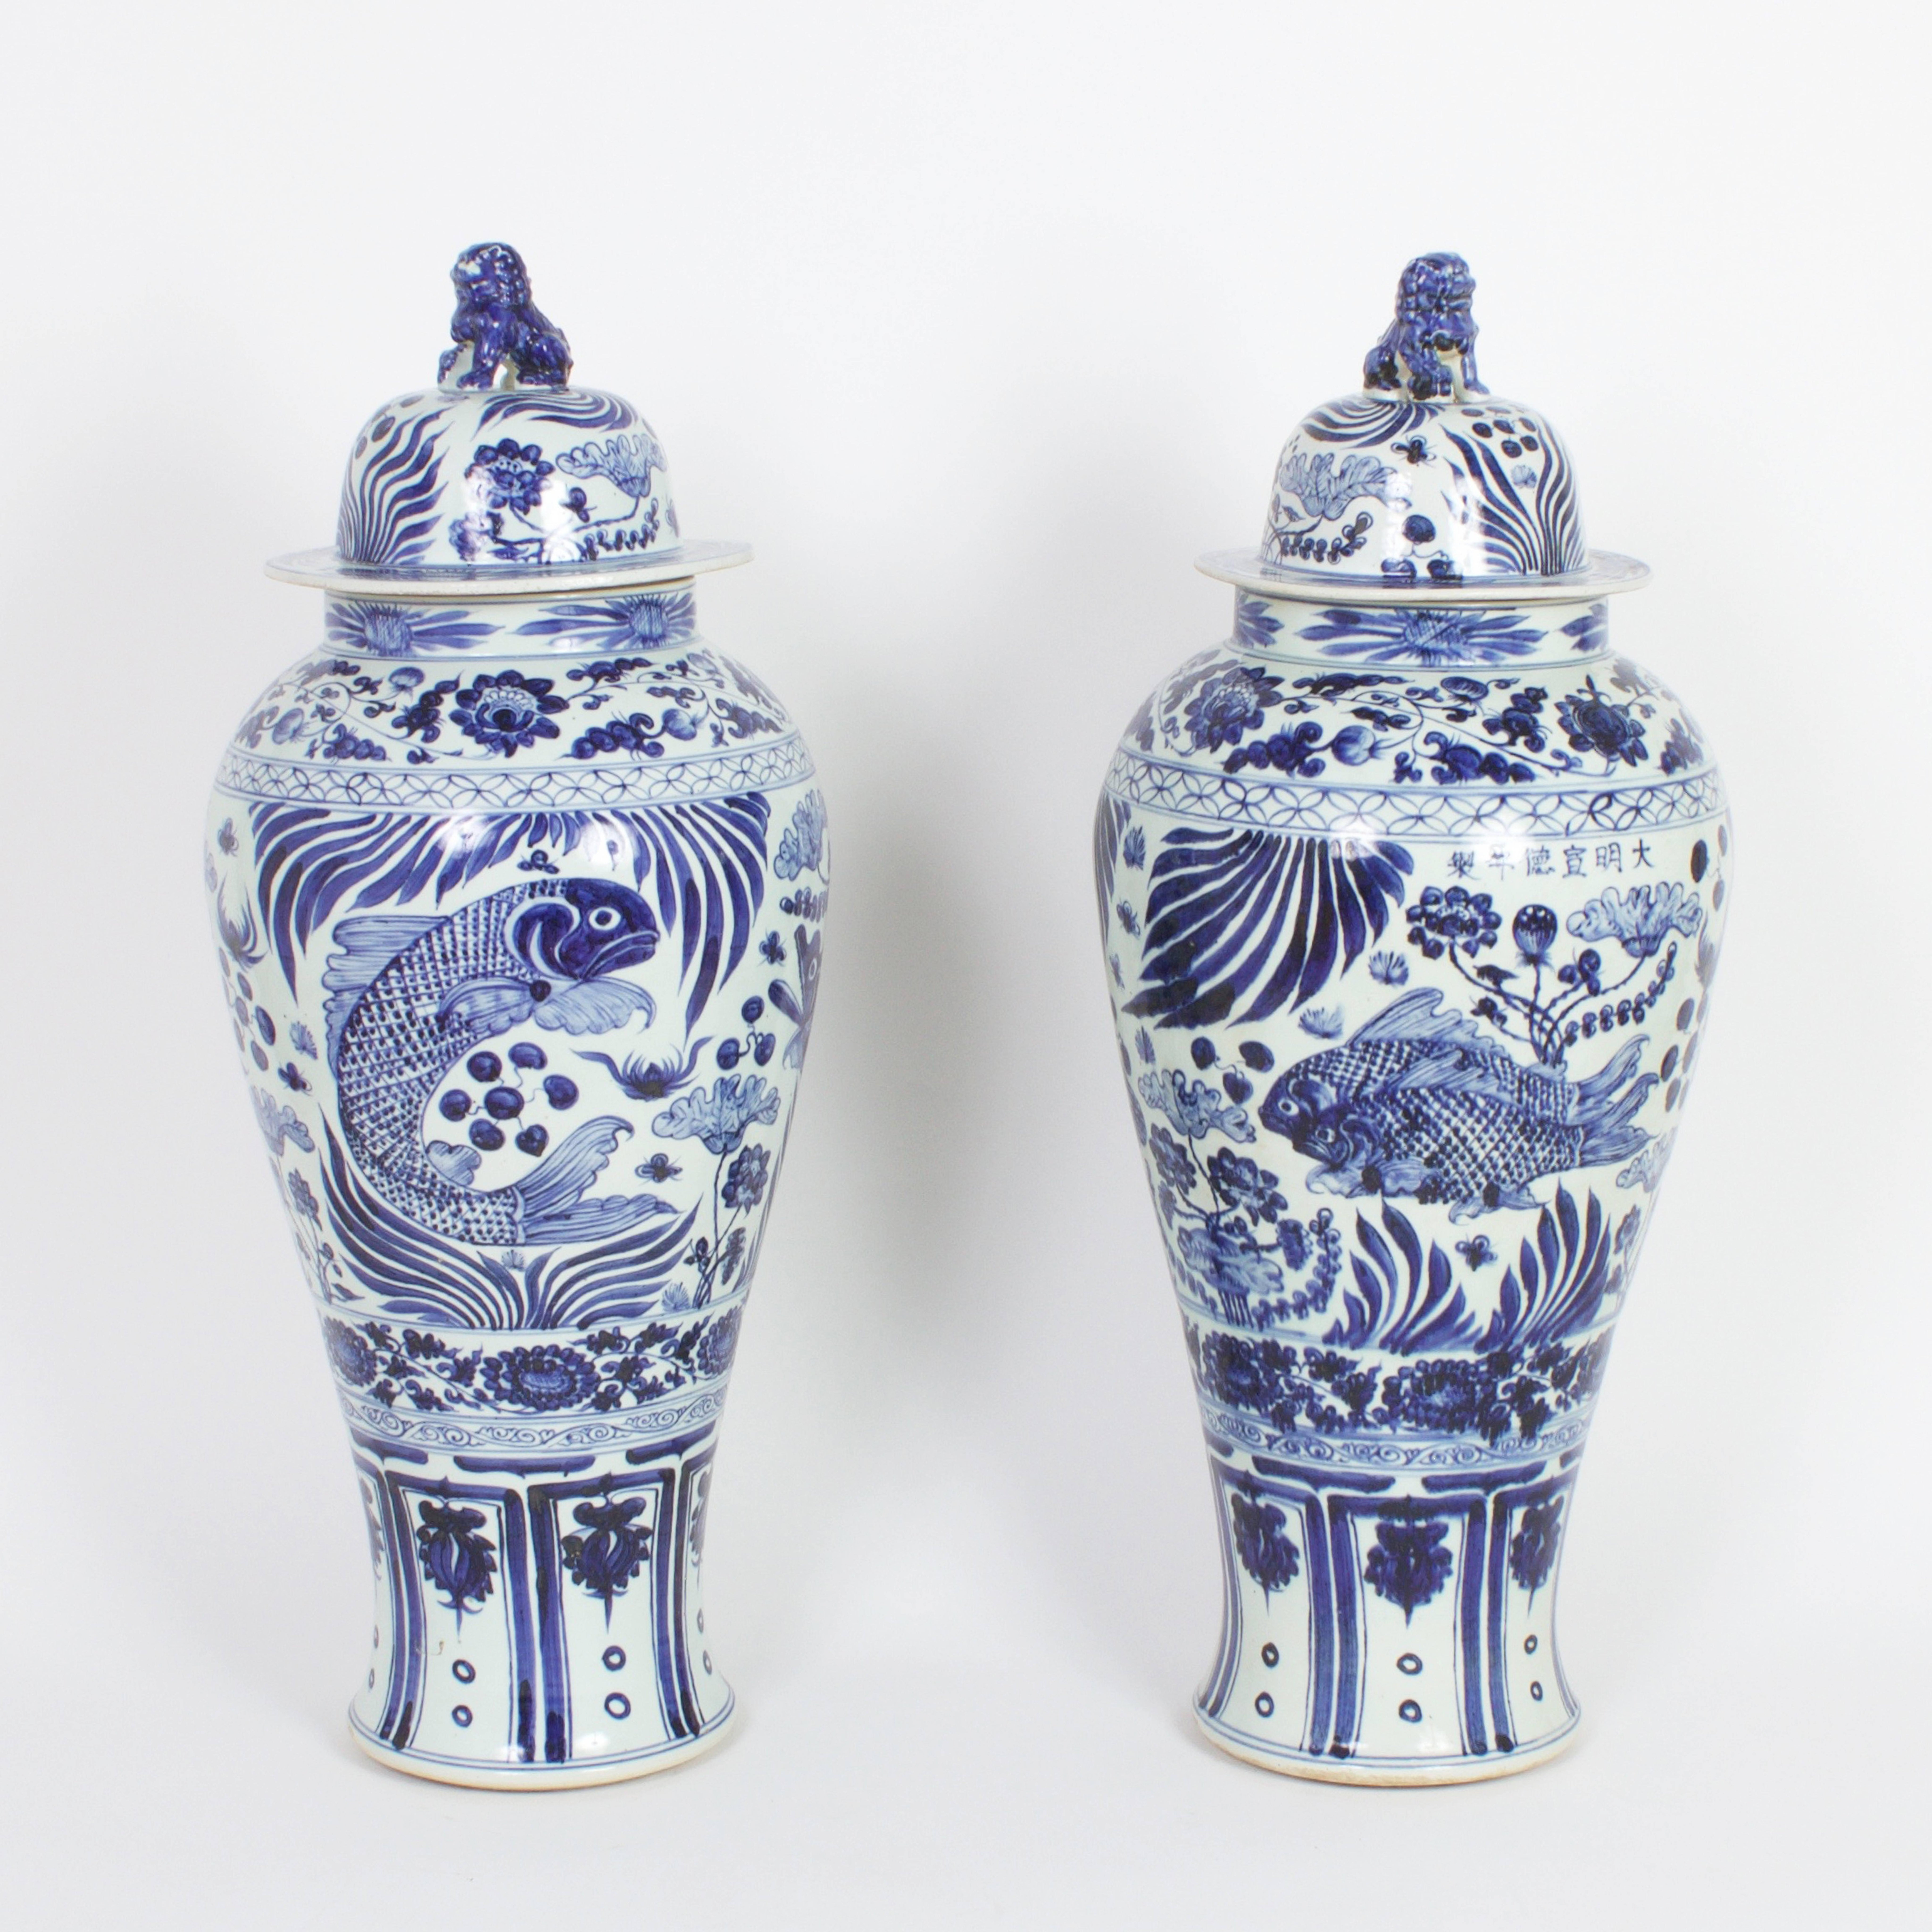 Large floor size pair of blue and white Chinese Export style porcelain lidded temple jars with an inspired fish and aquatic plant life motif, both jars with the same decoration. These palace urns are decorated with a master's touch and feature foo